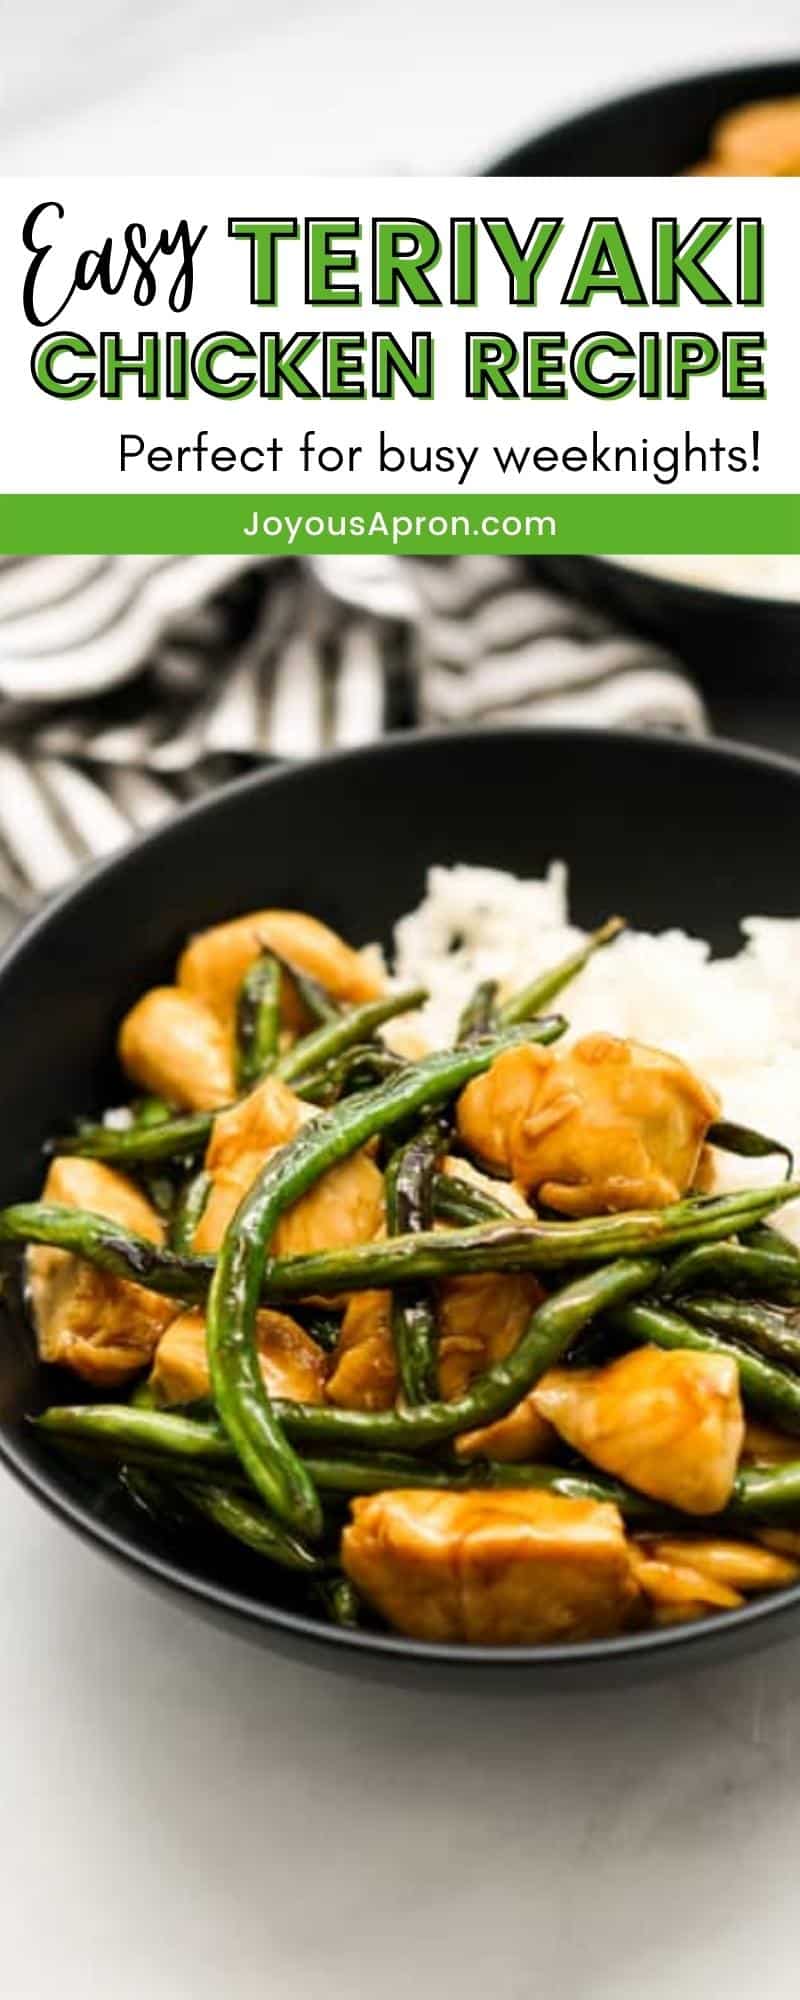 Teriyaki Chicken Stir Fry -easy homemade Japanese inspired teriyaki recipe! Juicy white meat chicken and green beans coated in homemade Teriyaki Sauce makes for a quick and delicious dinner ready under 30 minutes! via @joyousapron